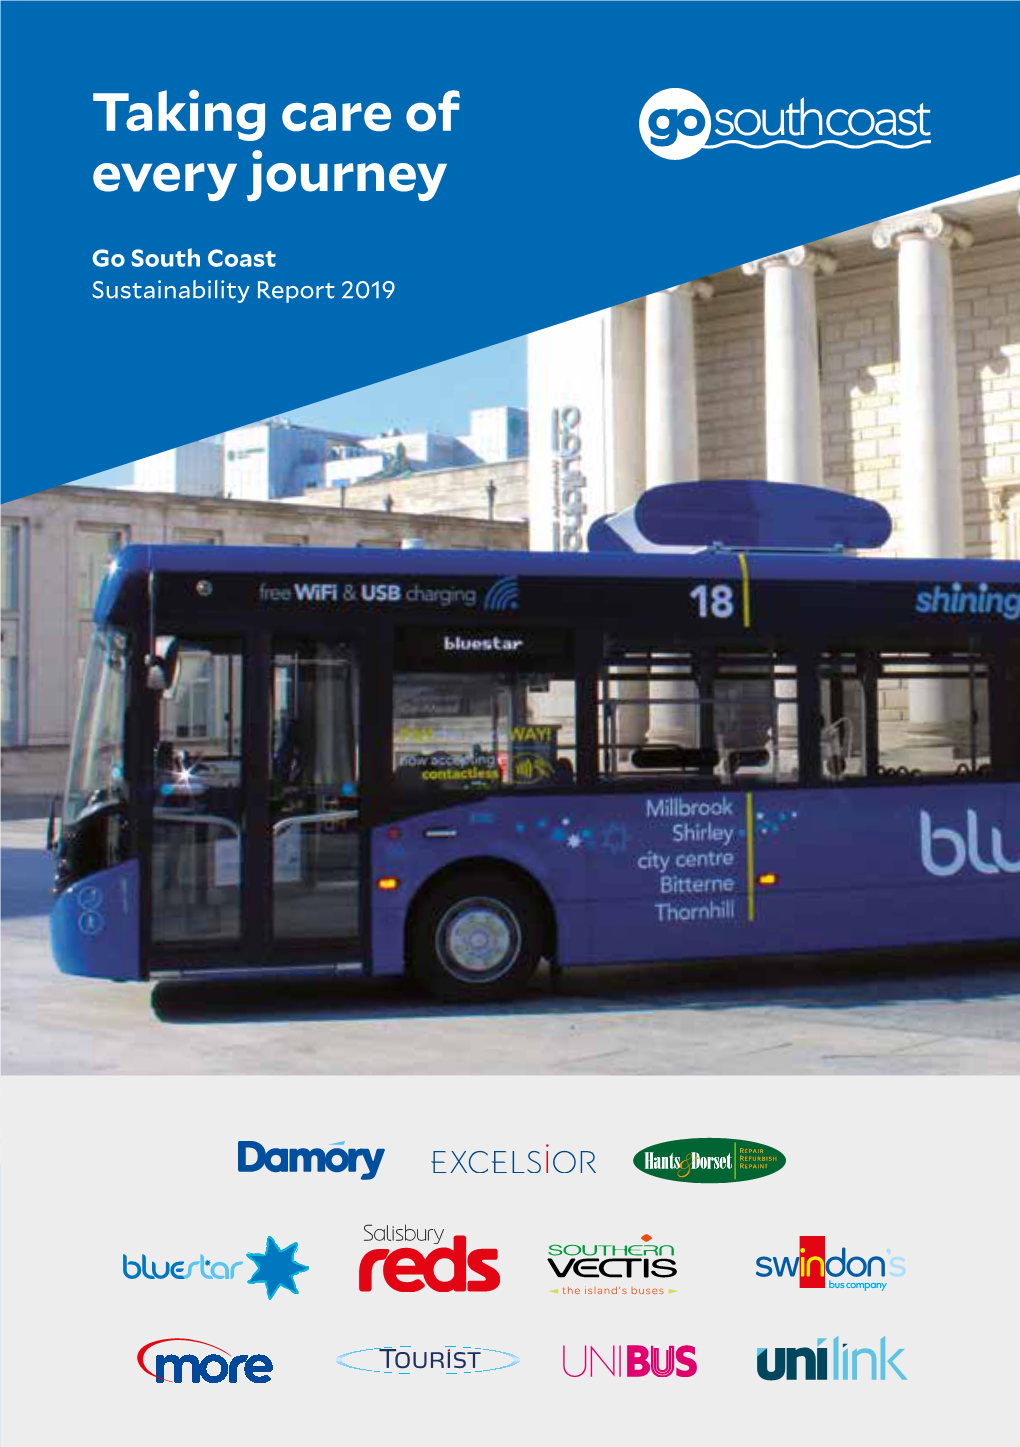 Go South Coast Sustainability Report 2019 Go South Coast Operates a Fleet of 824 Buses Across Dorset, Wiltshire, Hampshire and the Isle of Wight